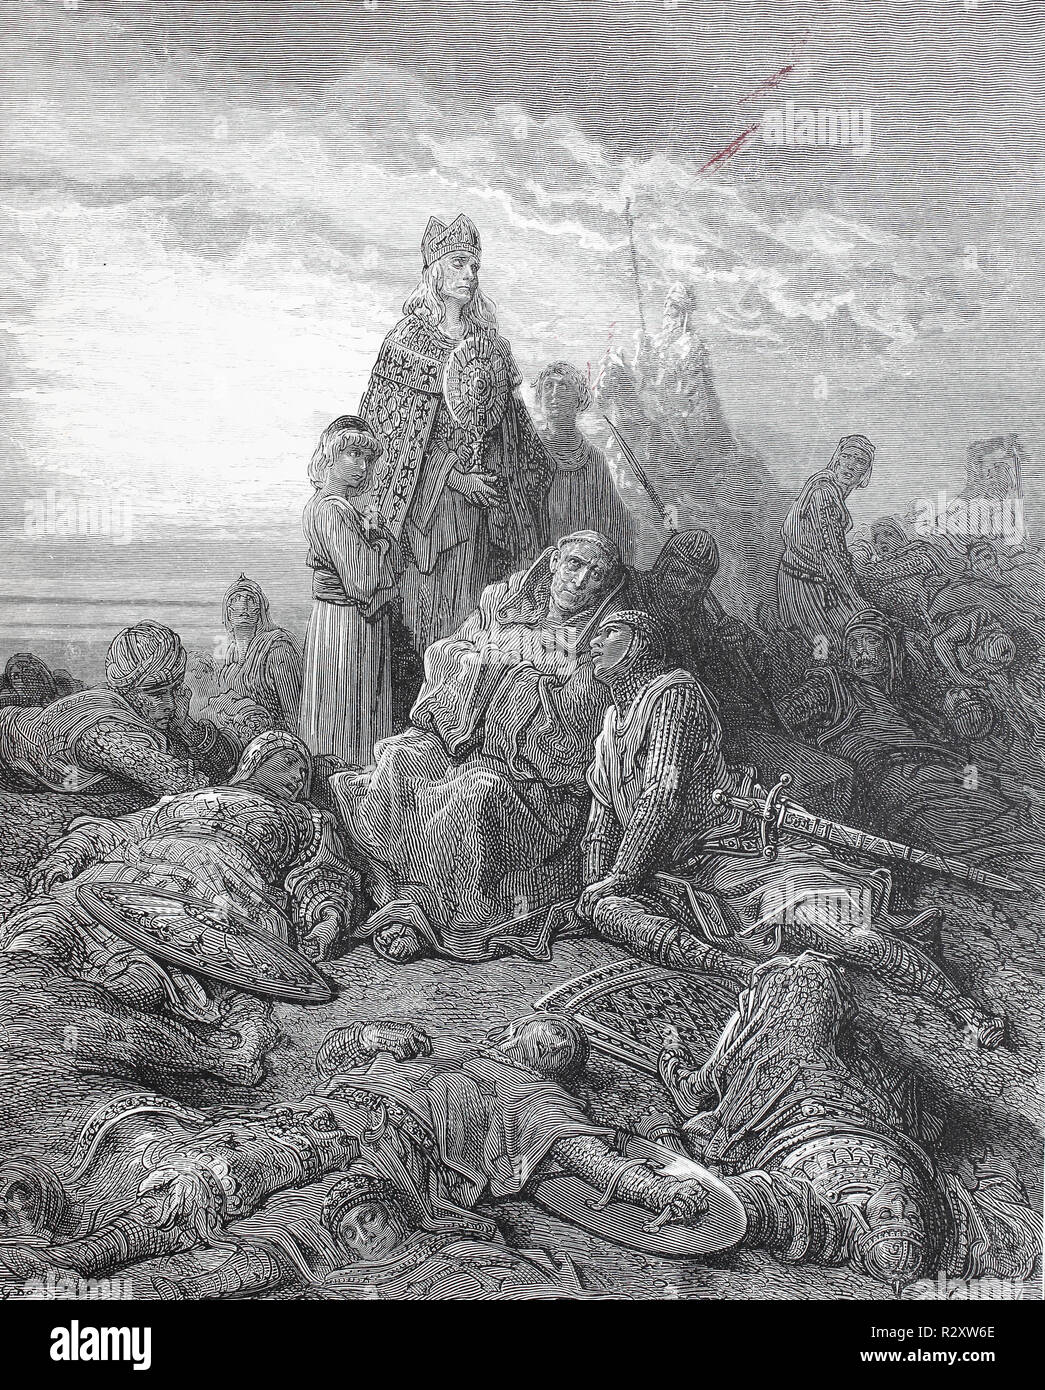 Digital improved reproduction, wounded crusader at the confession, Second crusade, Jerusalem. Der schwer verletzte Ritter bei der Beichte neben einem Priester, from an original print published in the 19th century Stock Photo